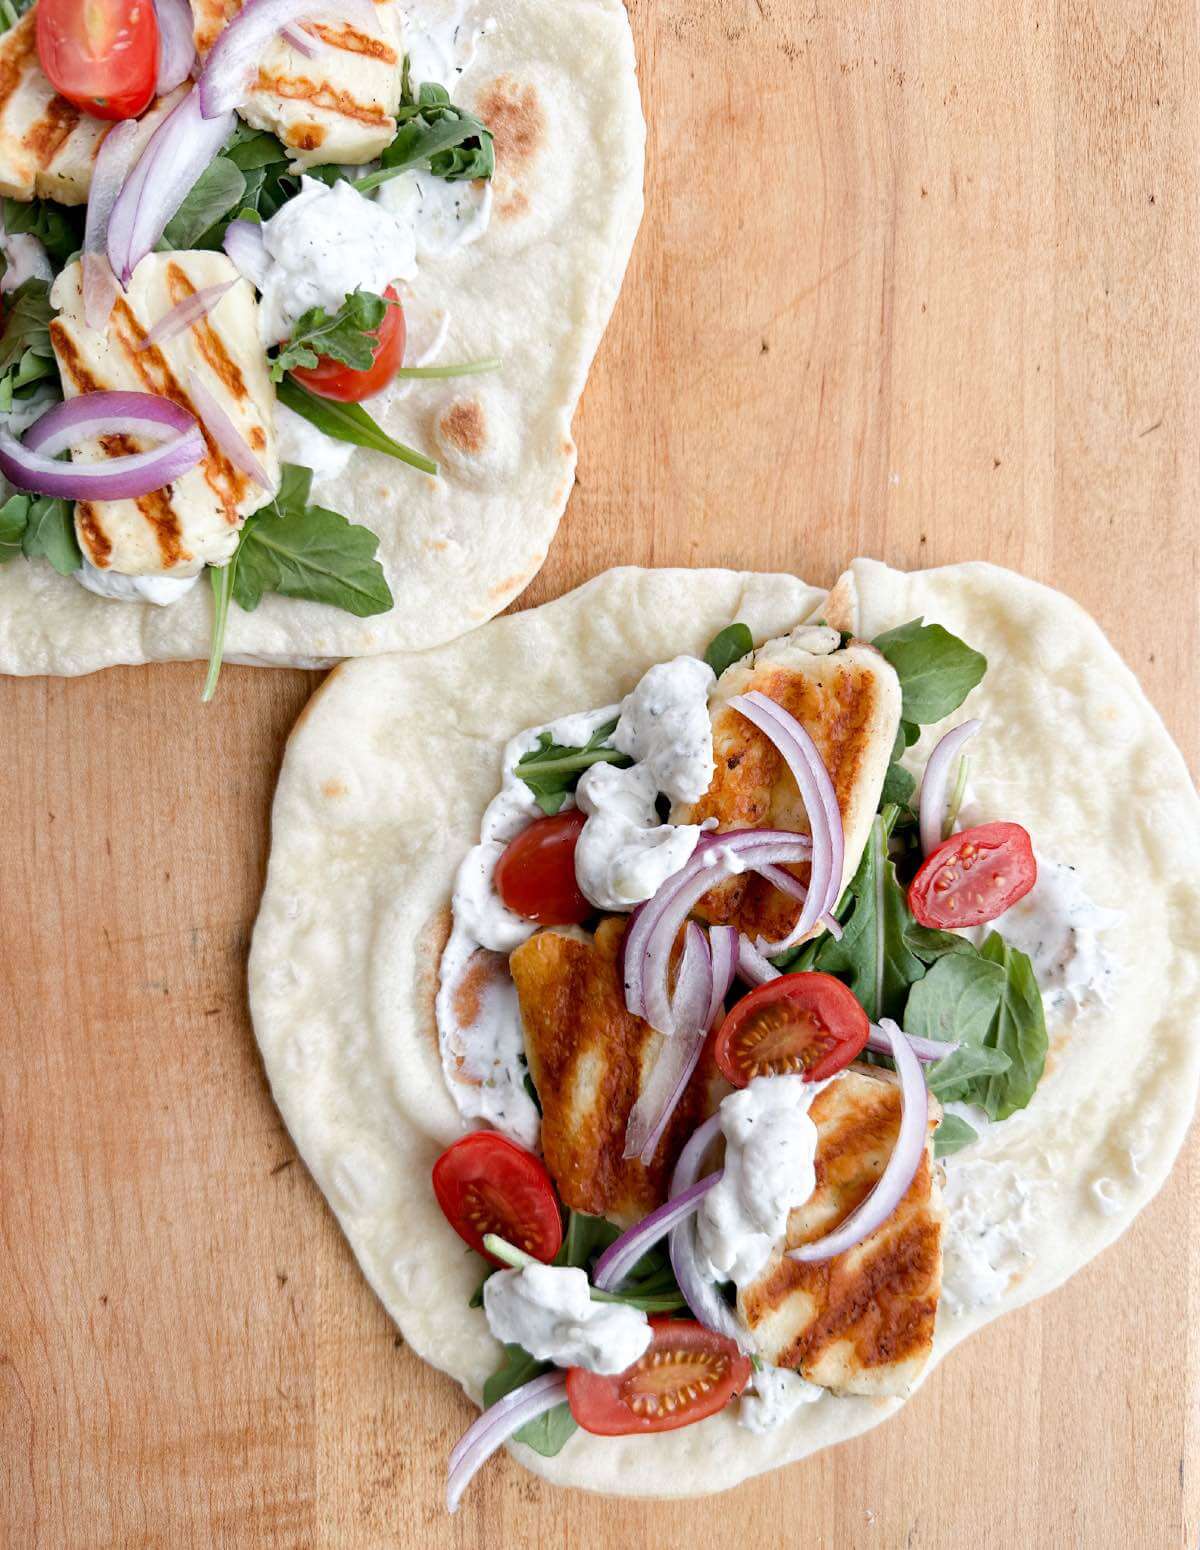 open faced halloumi cheese souvlaki with garlic pita bread, tzatziki, tomatoes, and sliced red onions.